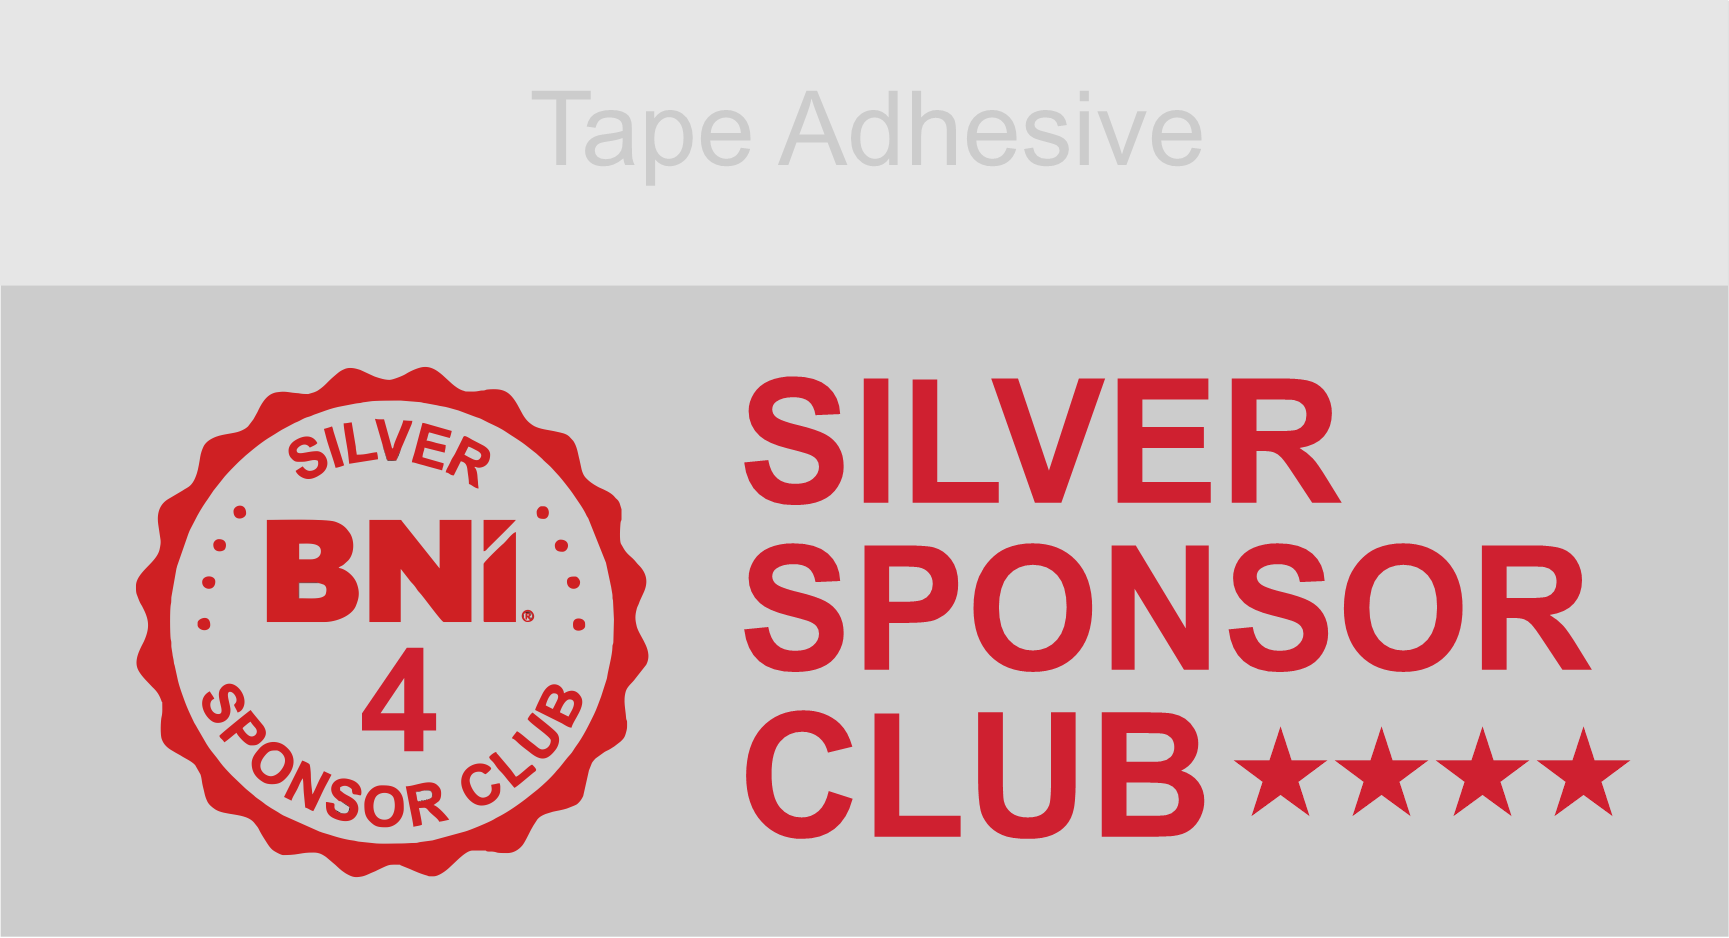 Silver and Red Sponor Ribbon Club 4 Sponsor